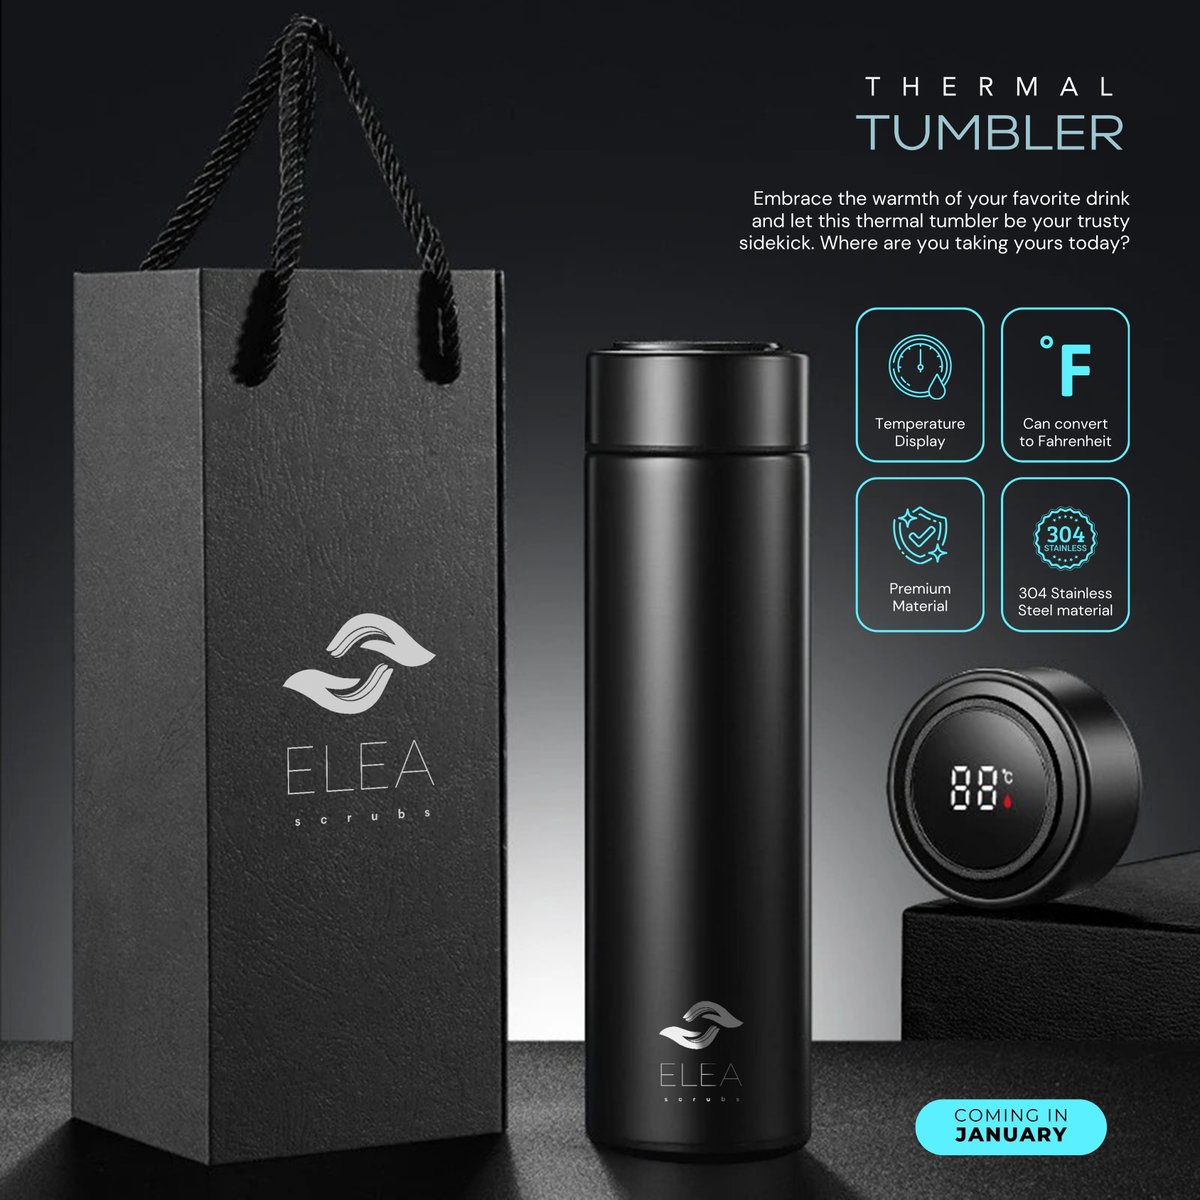 Get ready for a brand-new thermal tumbler experience in 2024! ✨

#thermaltumbler #onthegoessentials #tumbleradventures #stylishsips #reusablerevolution #sipsmart #tumblerupgrade #hydrationstation #medical #beverage #coffee #tumblerlife #thermal #tumbler #tumblers #stayhydrated